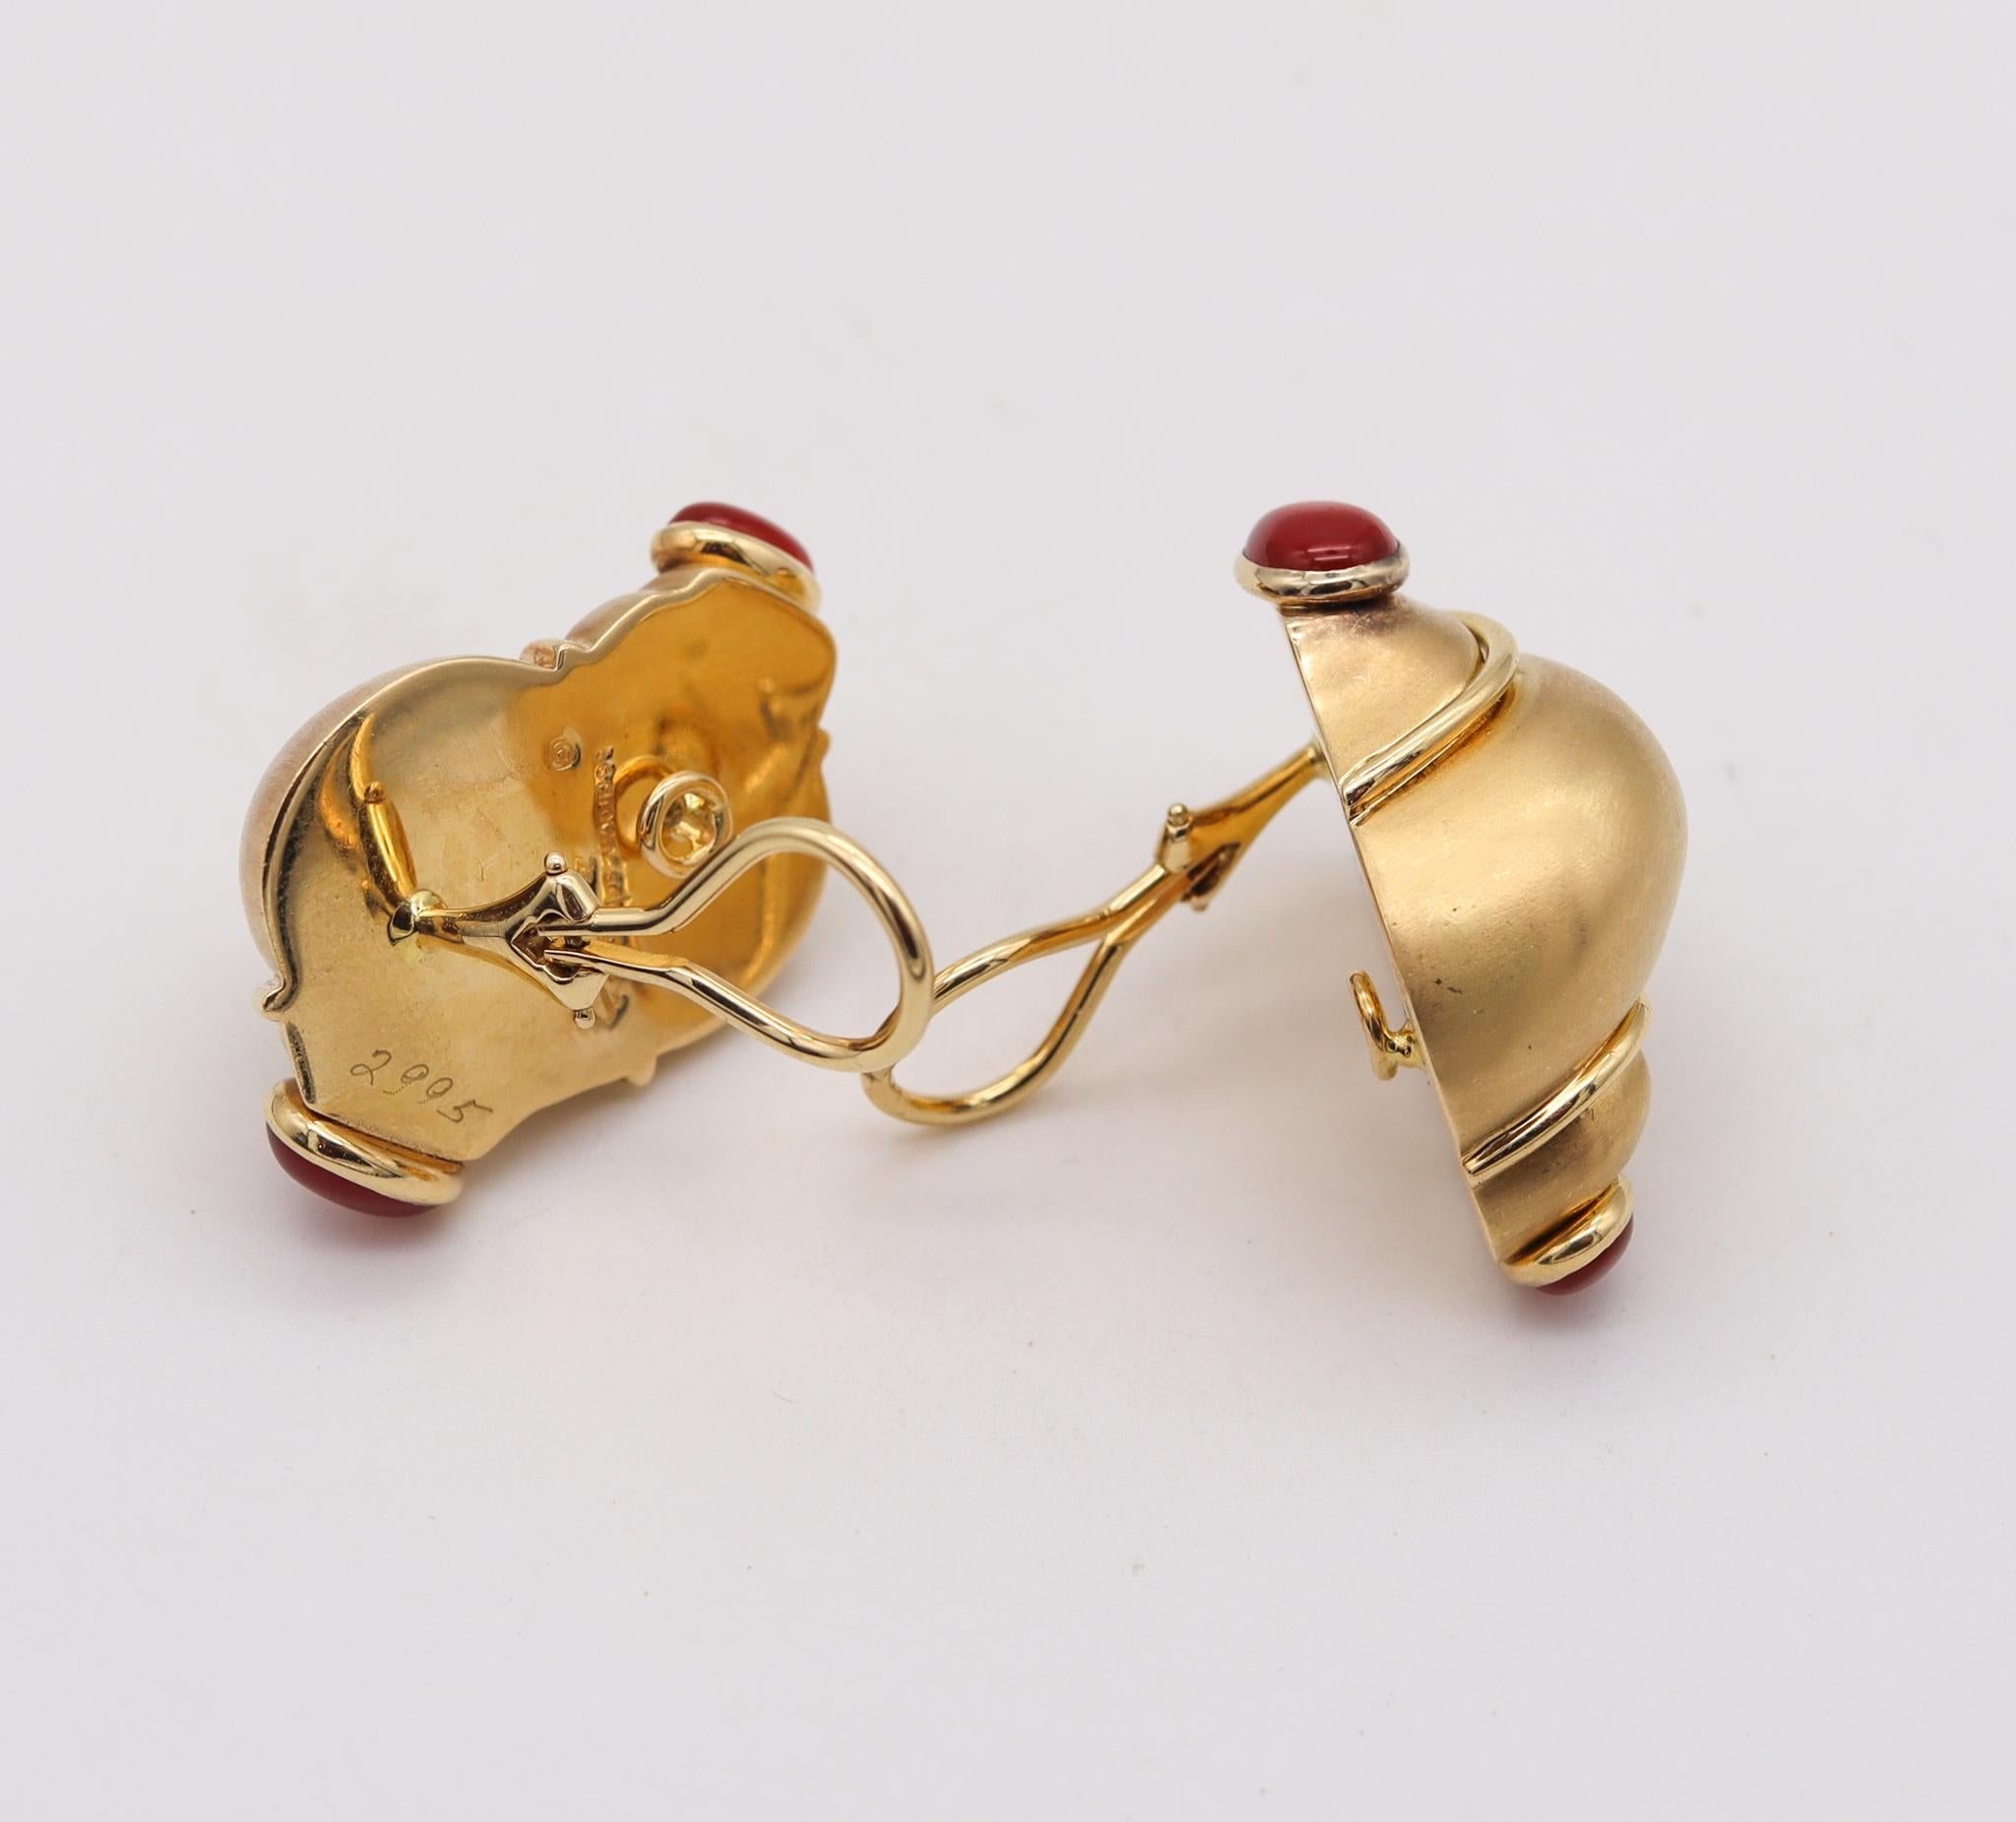 Cabochon Seaman Schepps Turbo Shell Earrings in 18Kt Yellow Gold with 6.54 Cts Carnelian For Sale